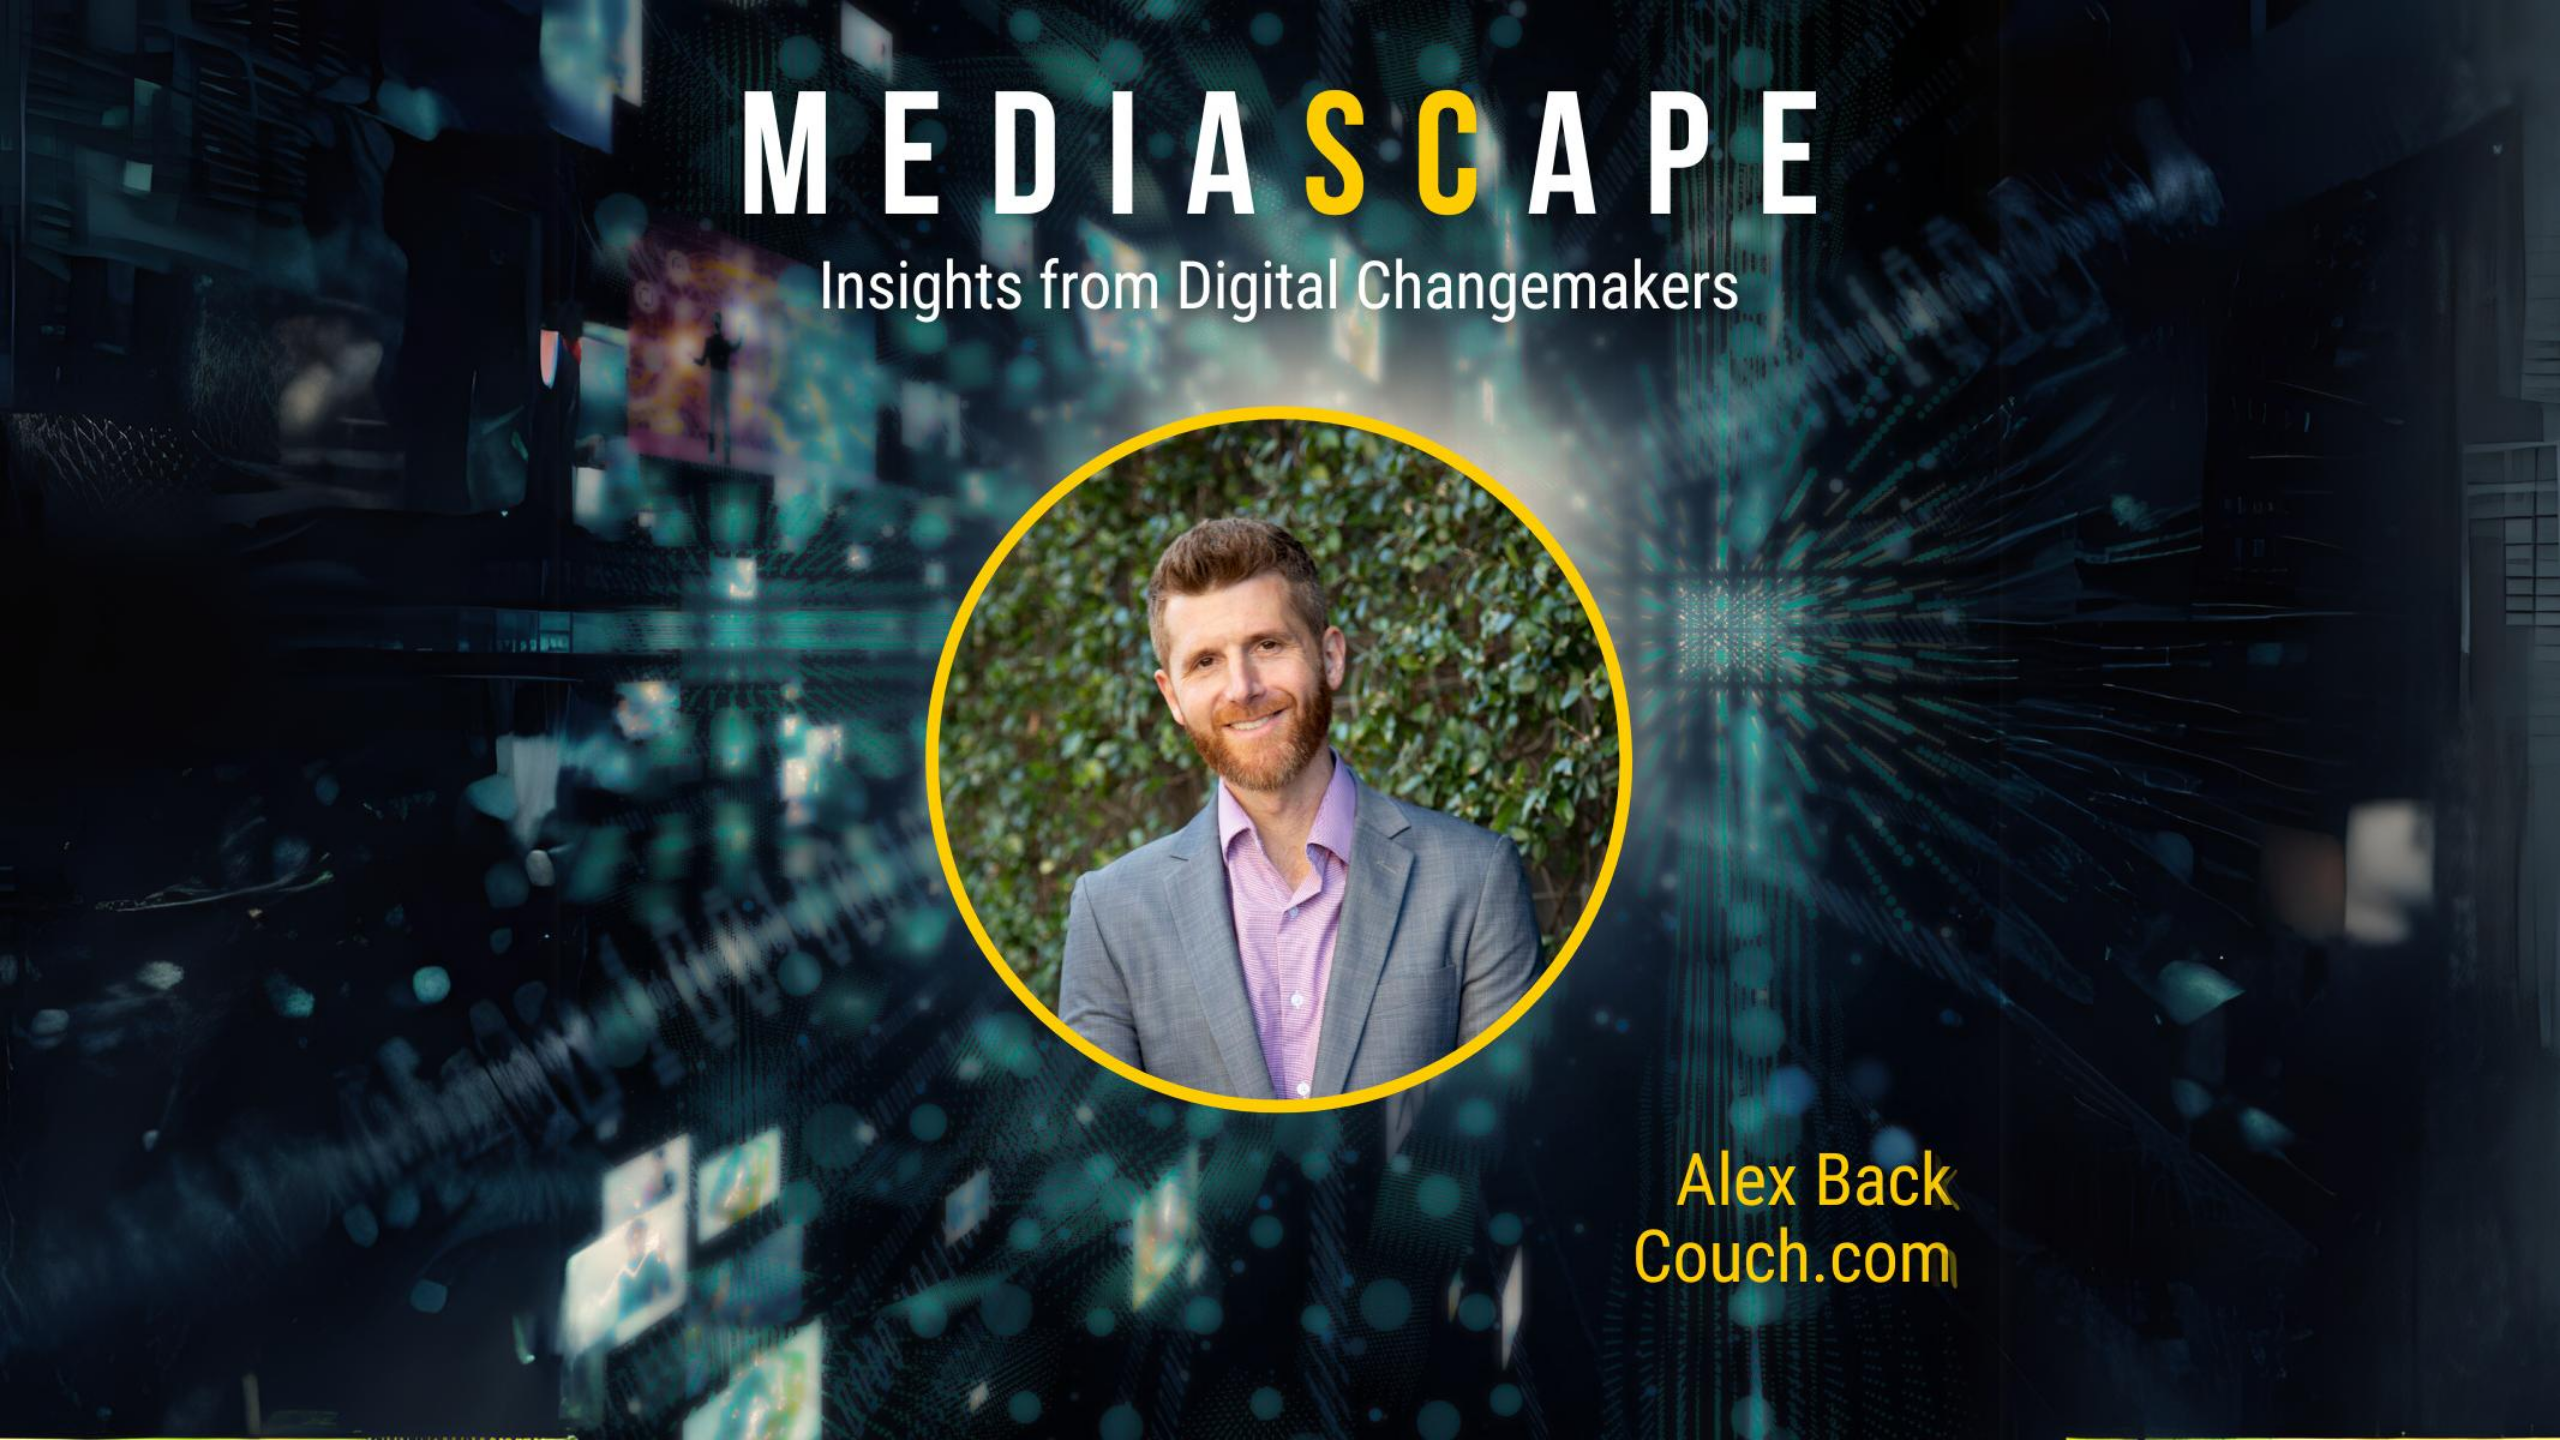 The image features a digital promotional banner for "MediaScape: Insights from Digital Changemakers" with a photo of Alex Back from Couch.com in the center. The background includes digital graphics and a cityscape with light streaks, suggesting technological themes.